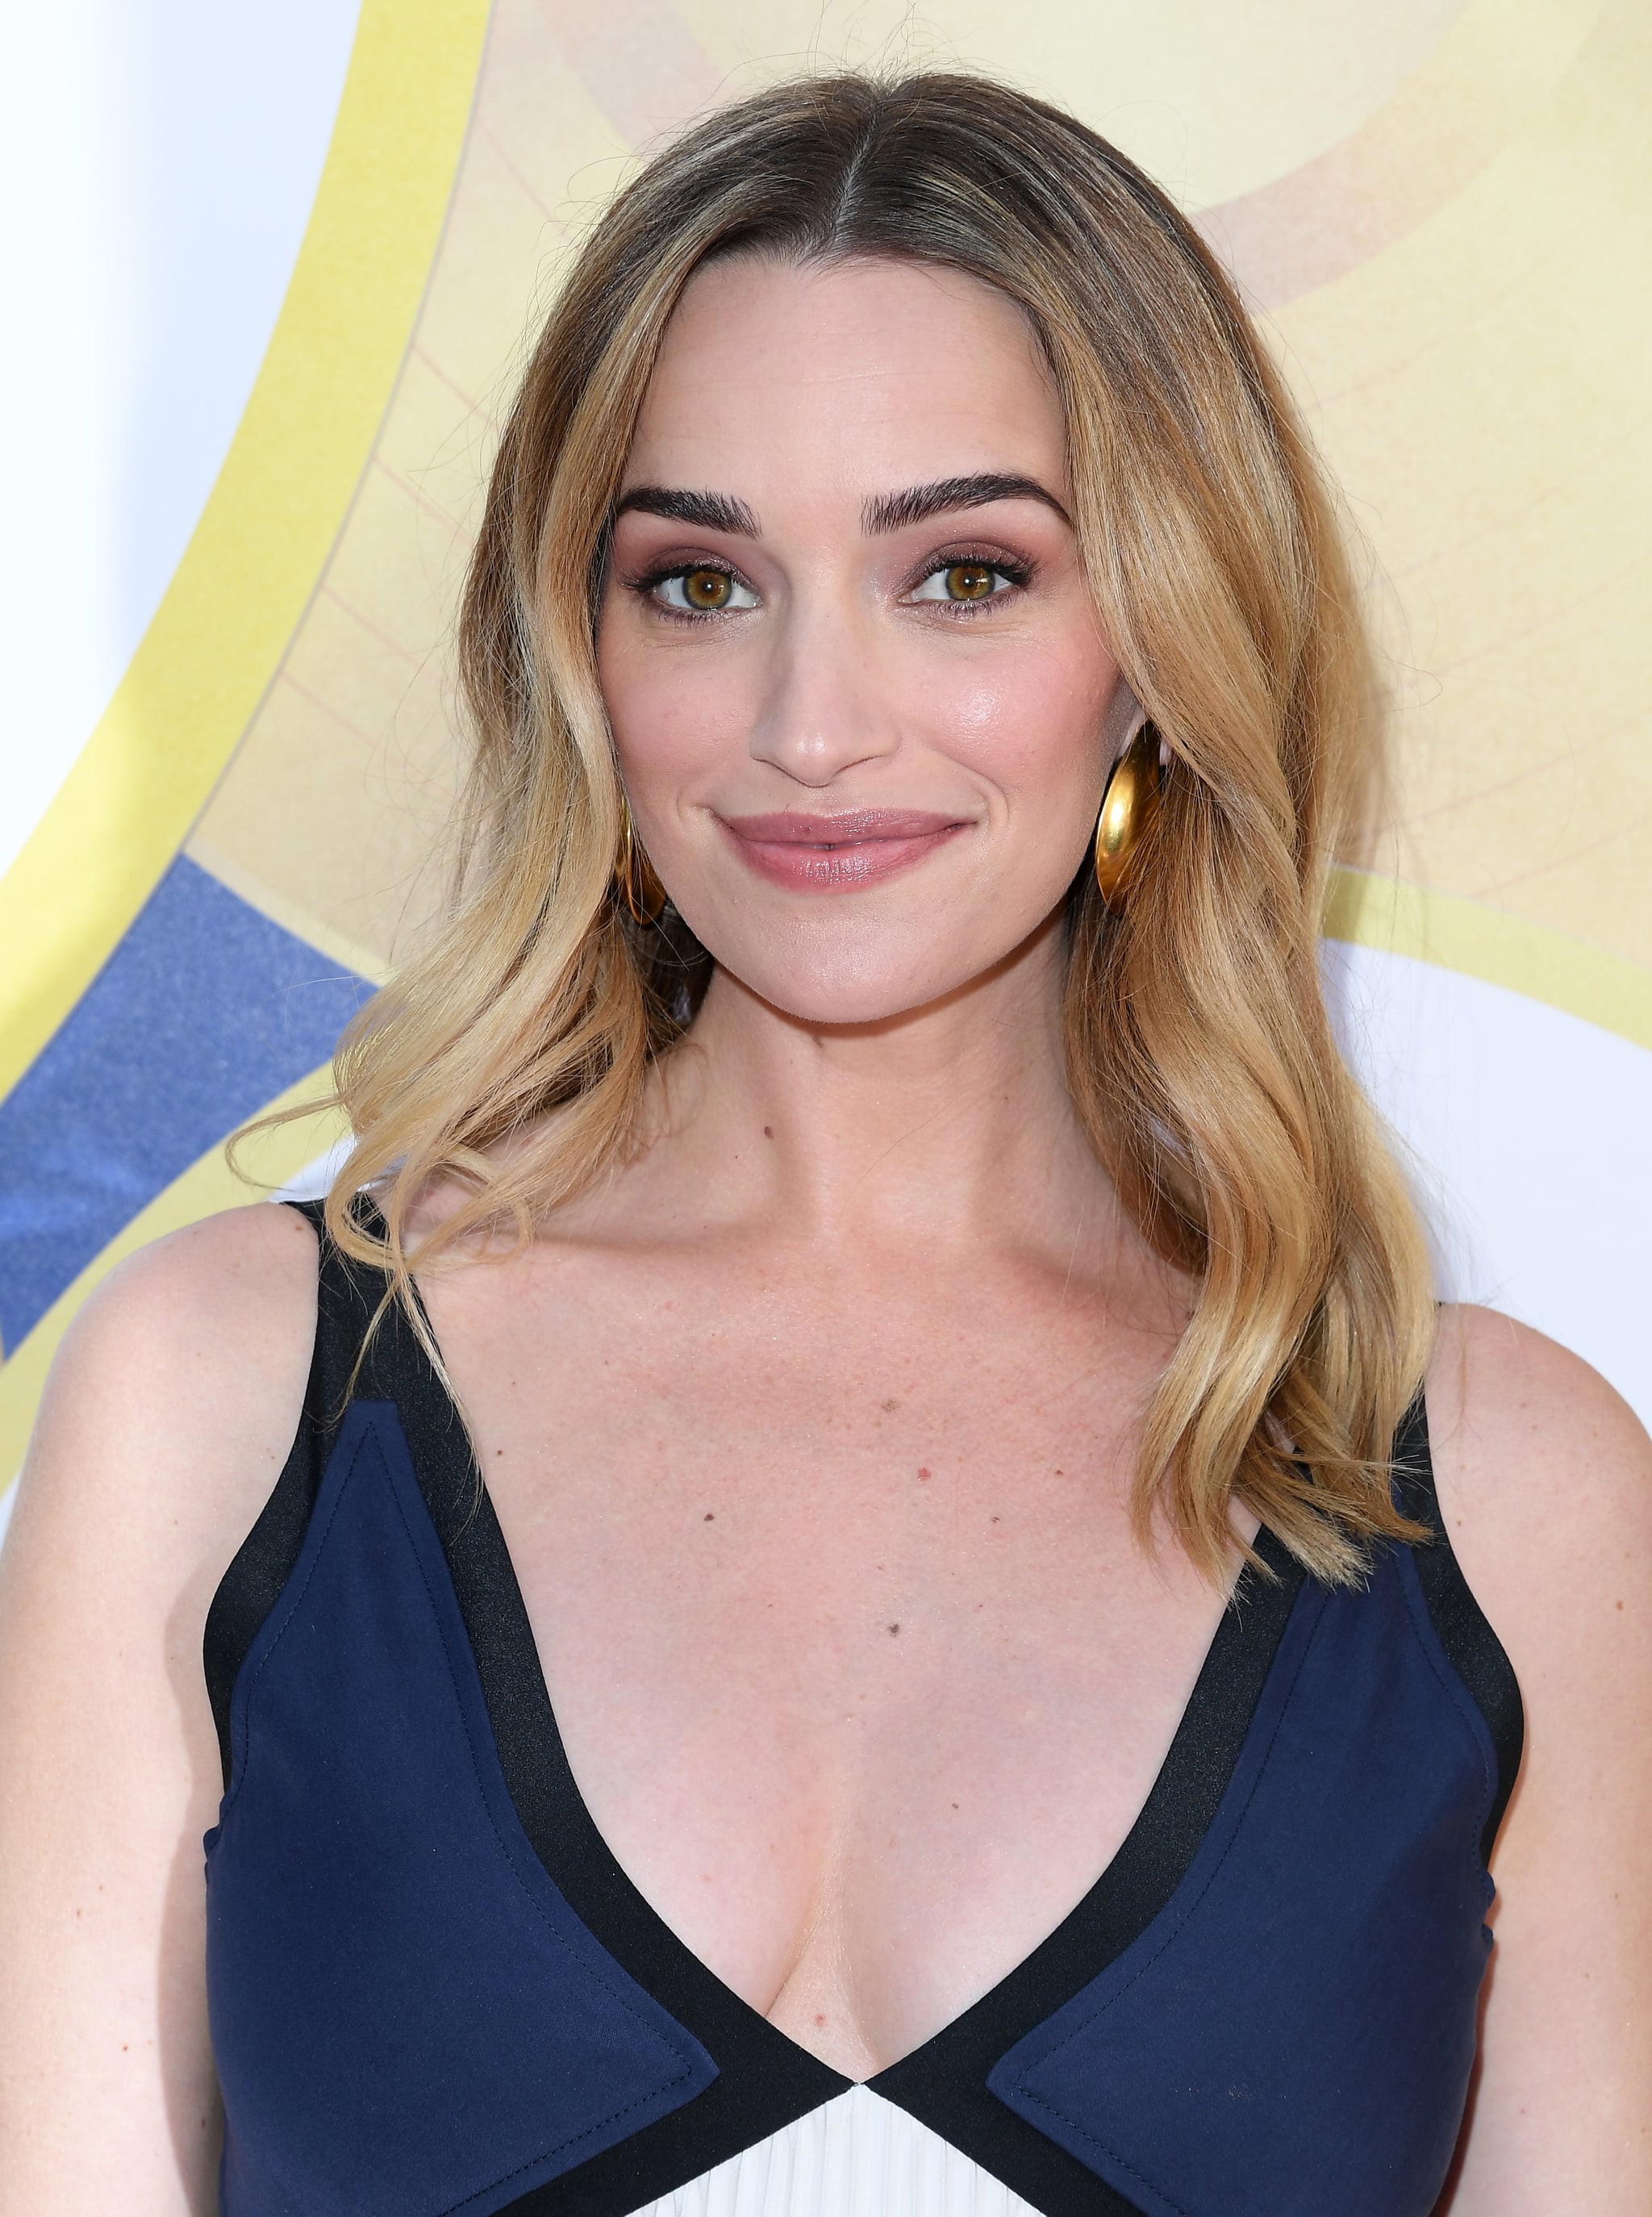 BEVERLY HILLS, CALIFORNIA - FEBRUARY 04: Brianne Howey arrives at the 2023 Gold Meets Golden 10th Anniversary Year Event  at Virginia Robinson Gardens on February 04, 2023 in Beverly Hills, California. (Photo by Steve Granitz/FilmMagic)